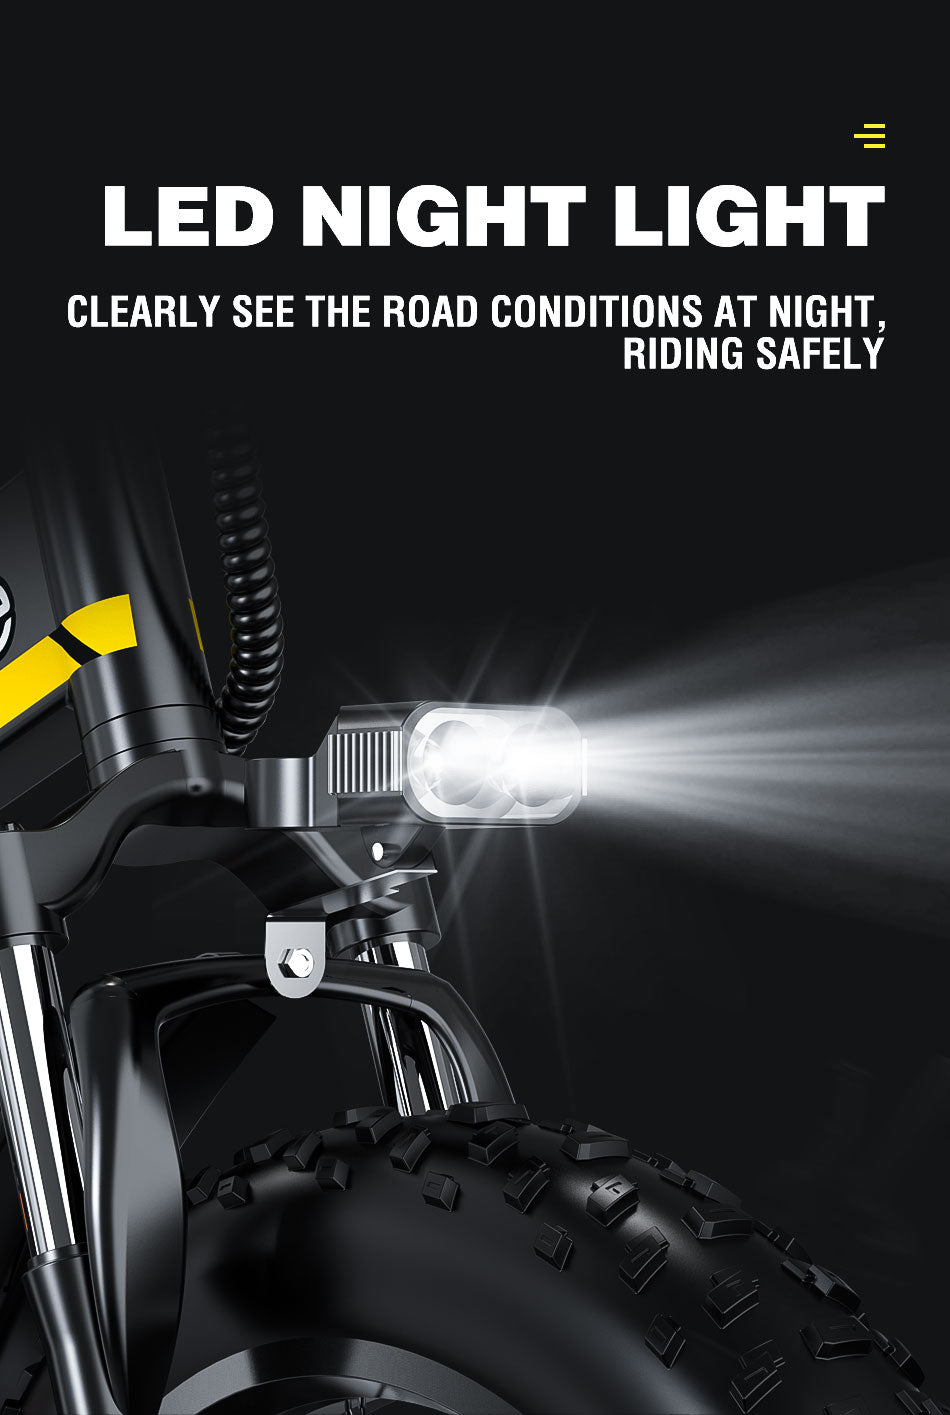 Janobike H20 Ebike, LED NIGHT LIGHT, CLEARLY SEE THE ROAD CONDITIONS AT NIGHT, RIDING SAFELY